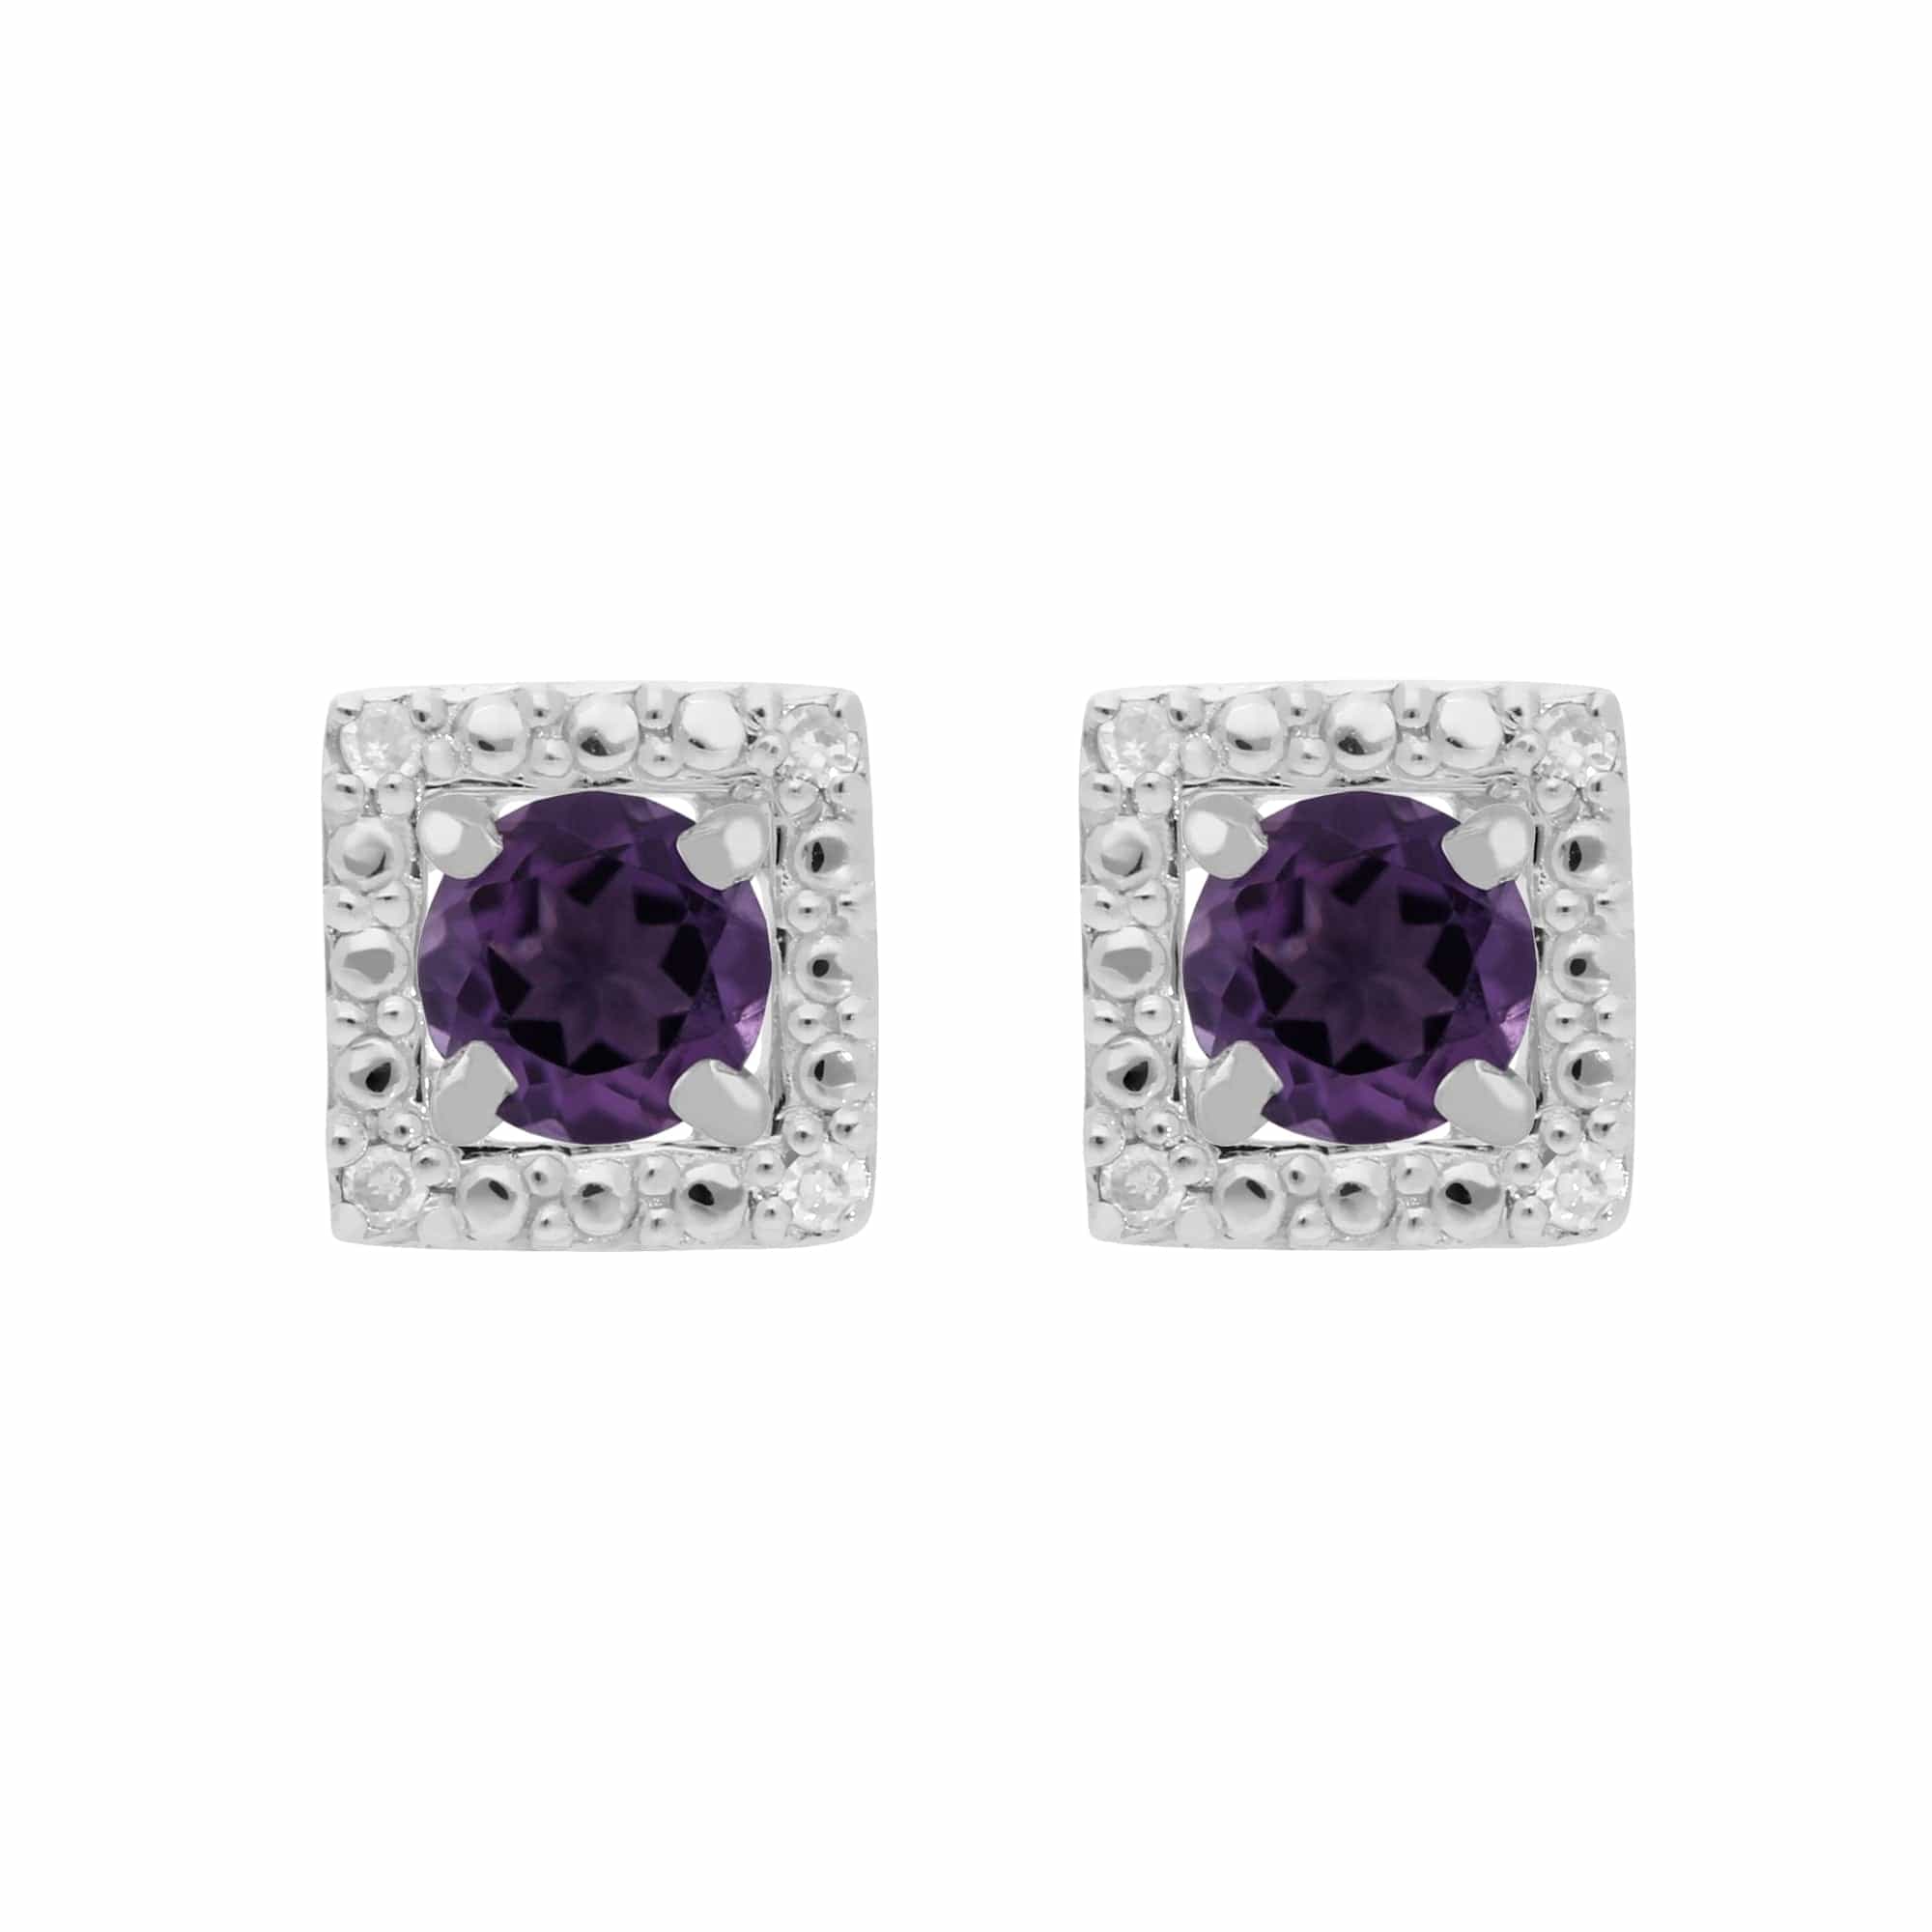 11612-162E0245019 Classic Round Amethyst Stud Earrings with Detachable Diamond Square Ear Jacket in 9ct White Gold 1